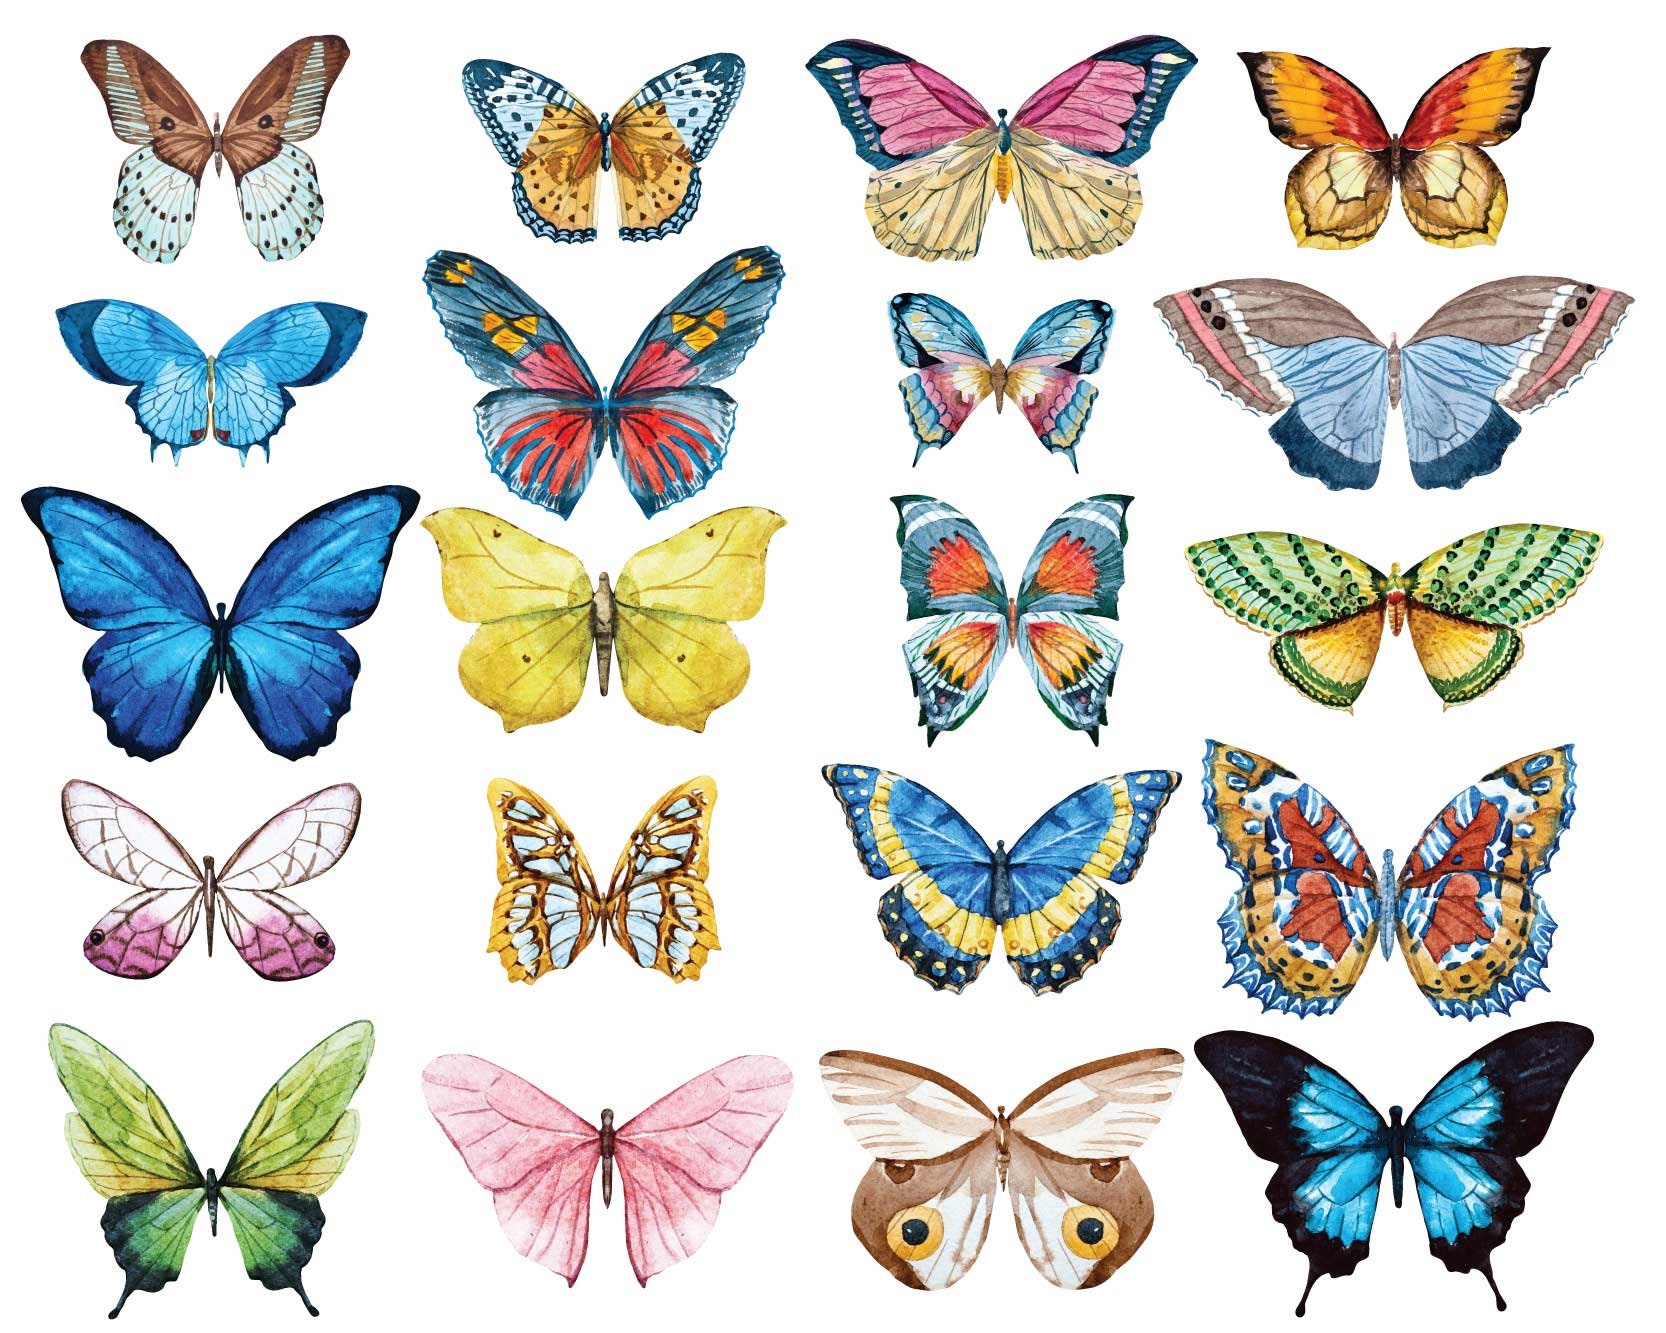 Vehicle Graphics - Animal and Wildlife Decals - VG845 Butterfly Decal